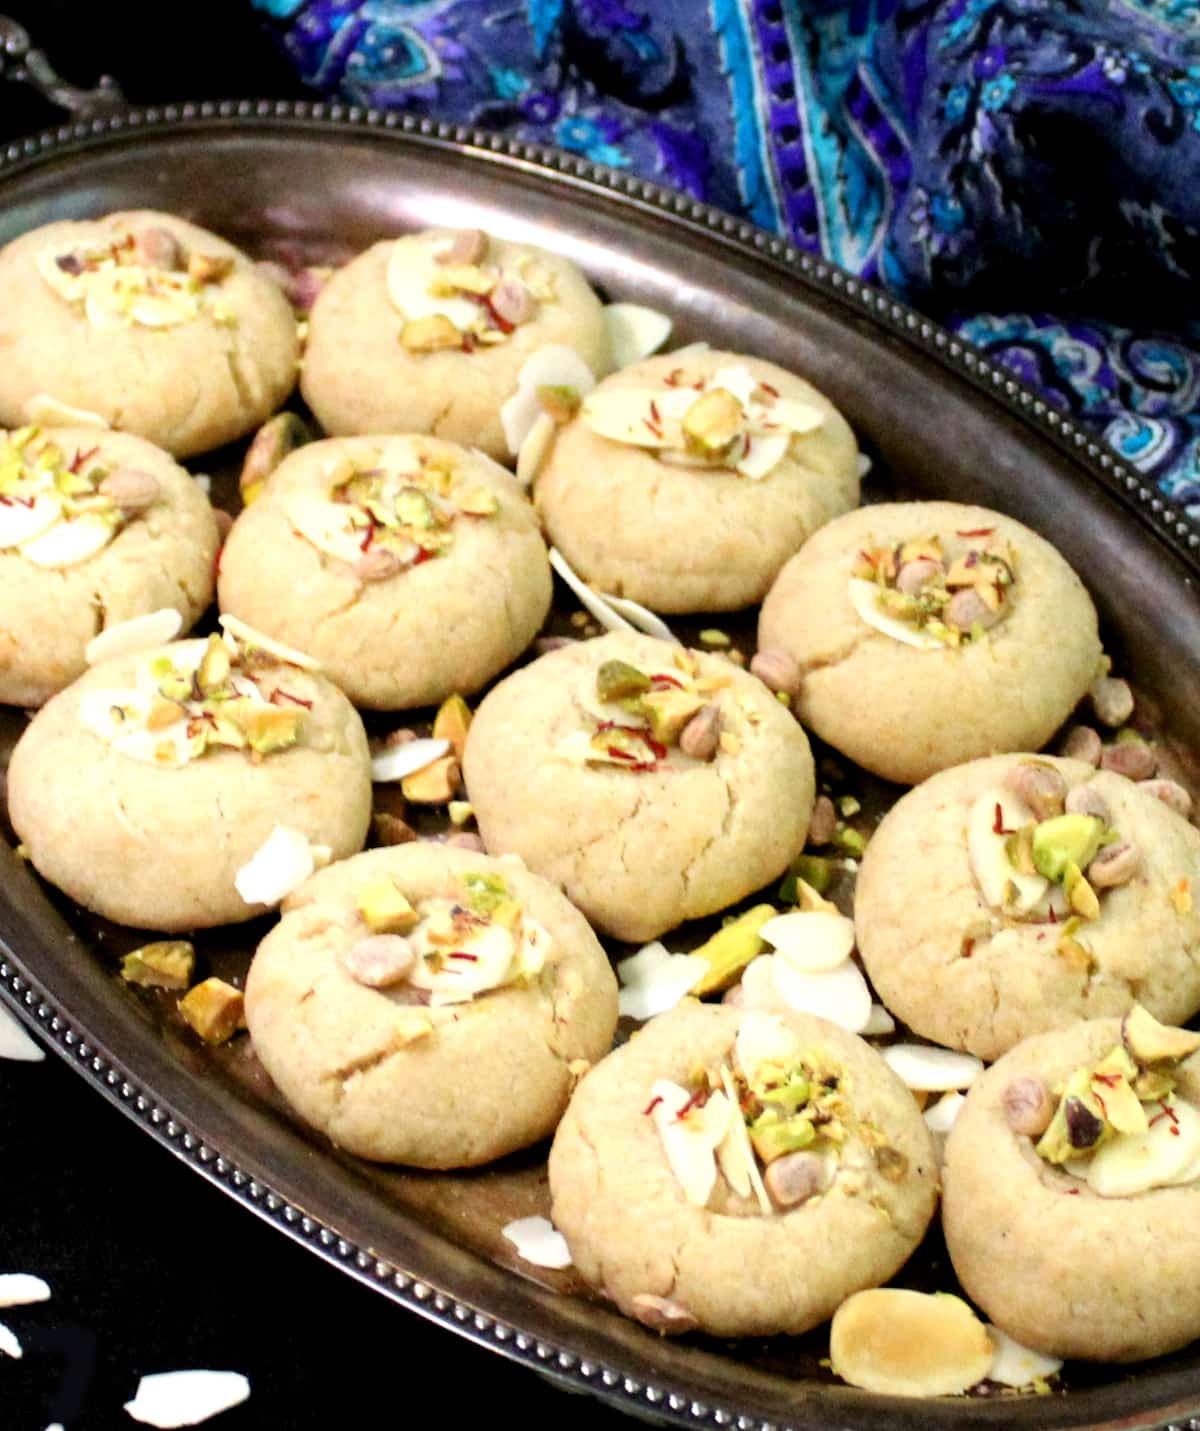 A nankhatai is a fabled, melt-in-the-mouth Indian cookie that’s scented with cardamom, studded with nuts, and is impossible to resist